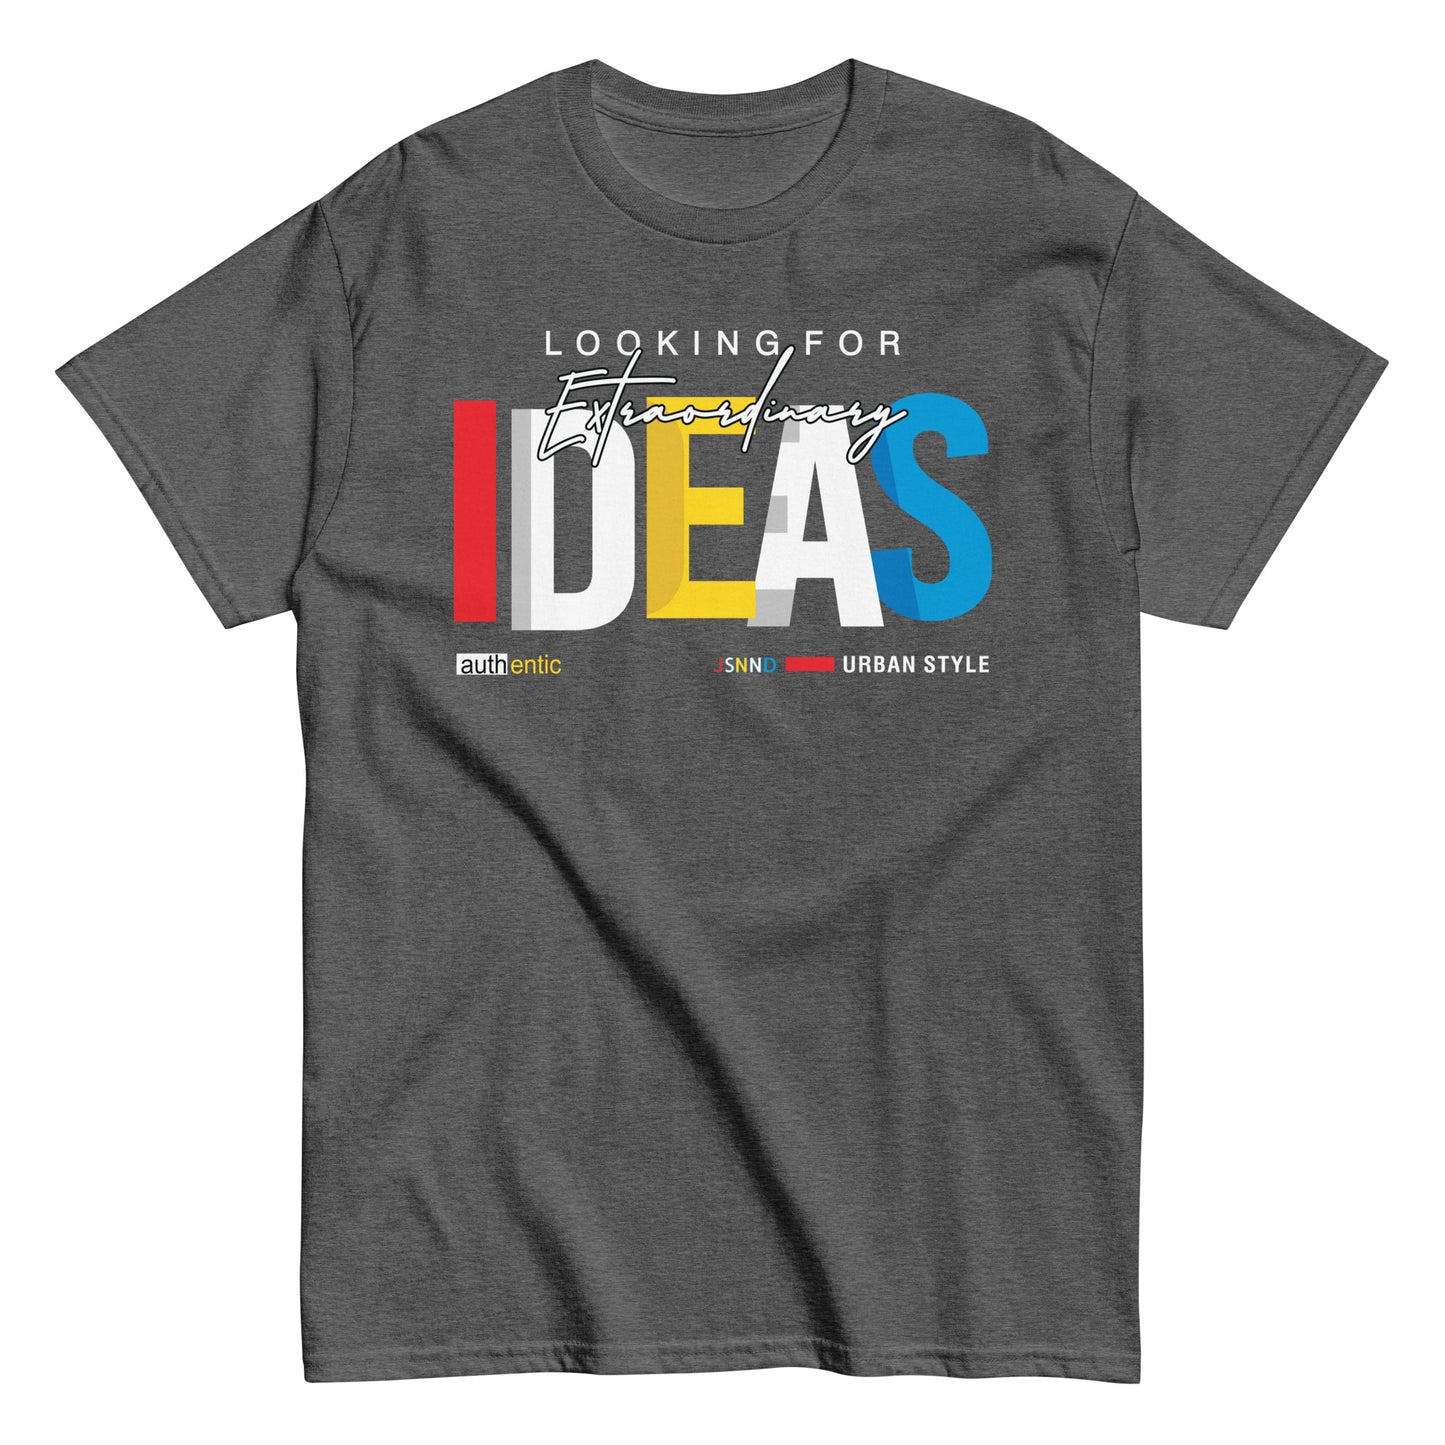 Looking for Ideas T-shirt